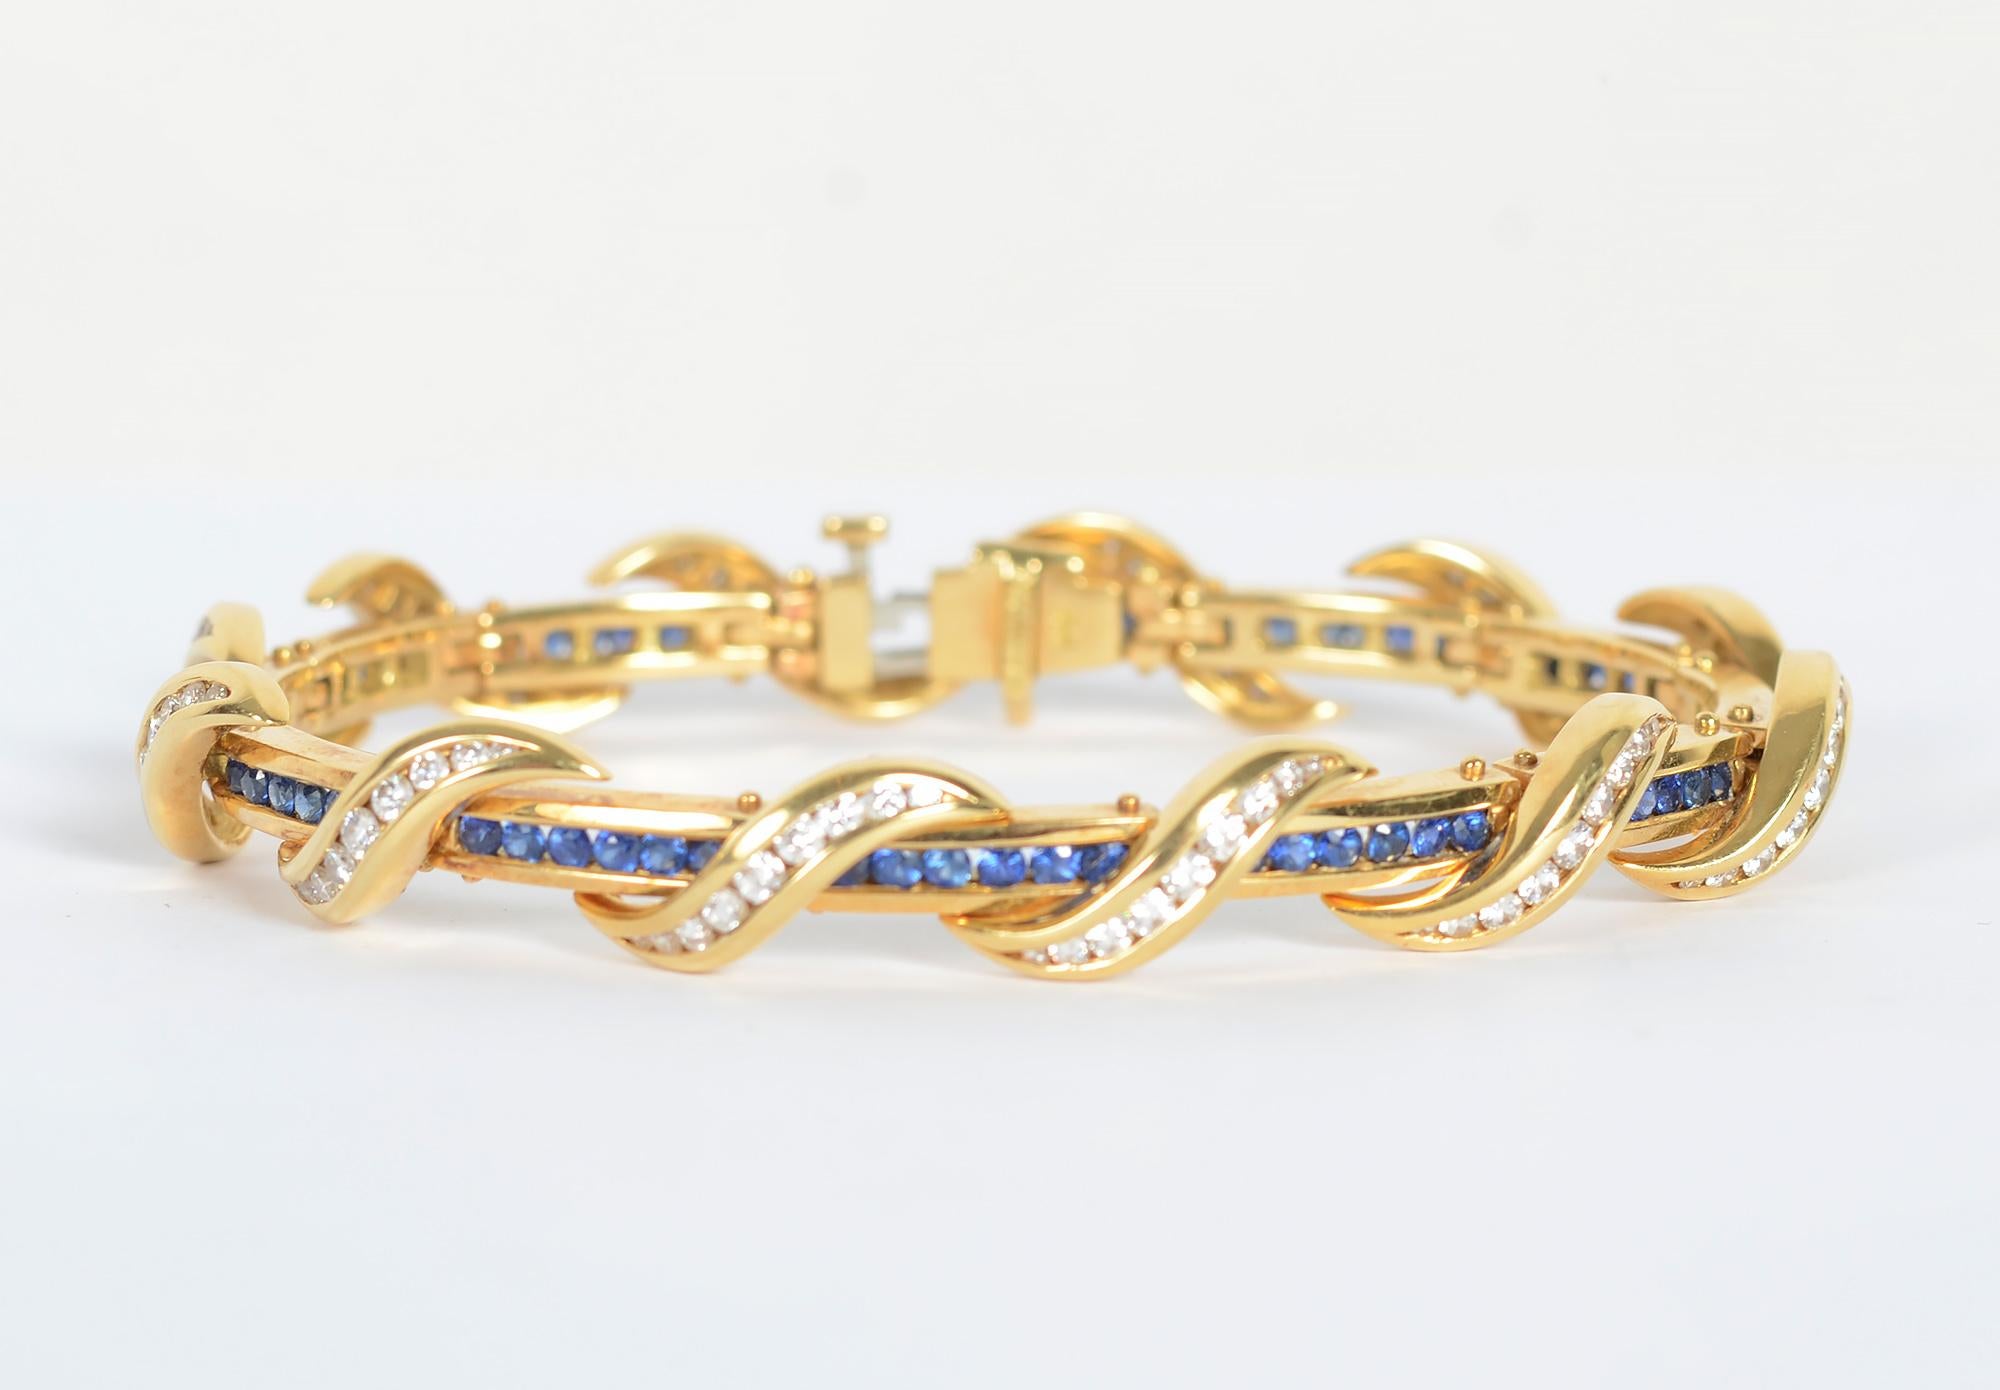 Elegant sapphire and diamond bracelet by American designer, Charles Krypell. Channel set sapphires encircle the wrist with gracefully  curved diamonds overlapping. The bracelet has 108  diamonds with a total weight of approximately 2.5 carats. It